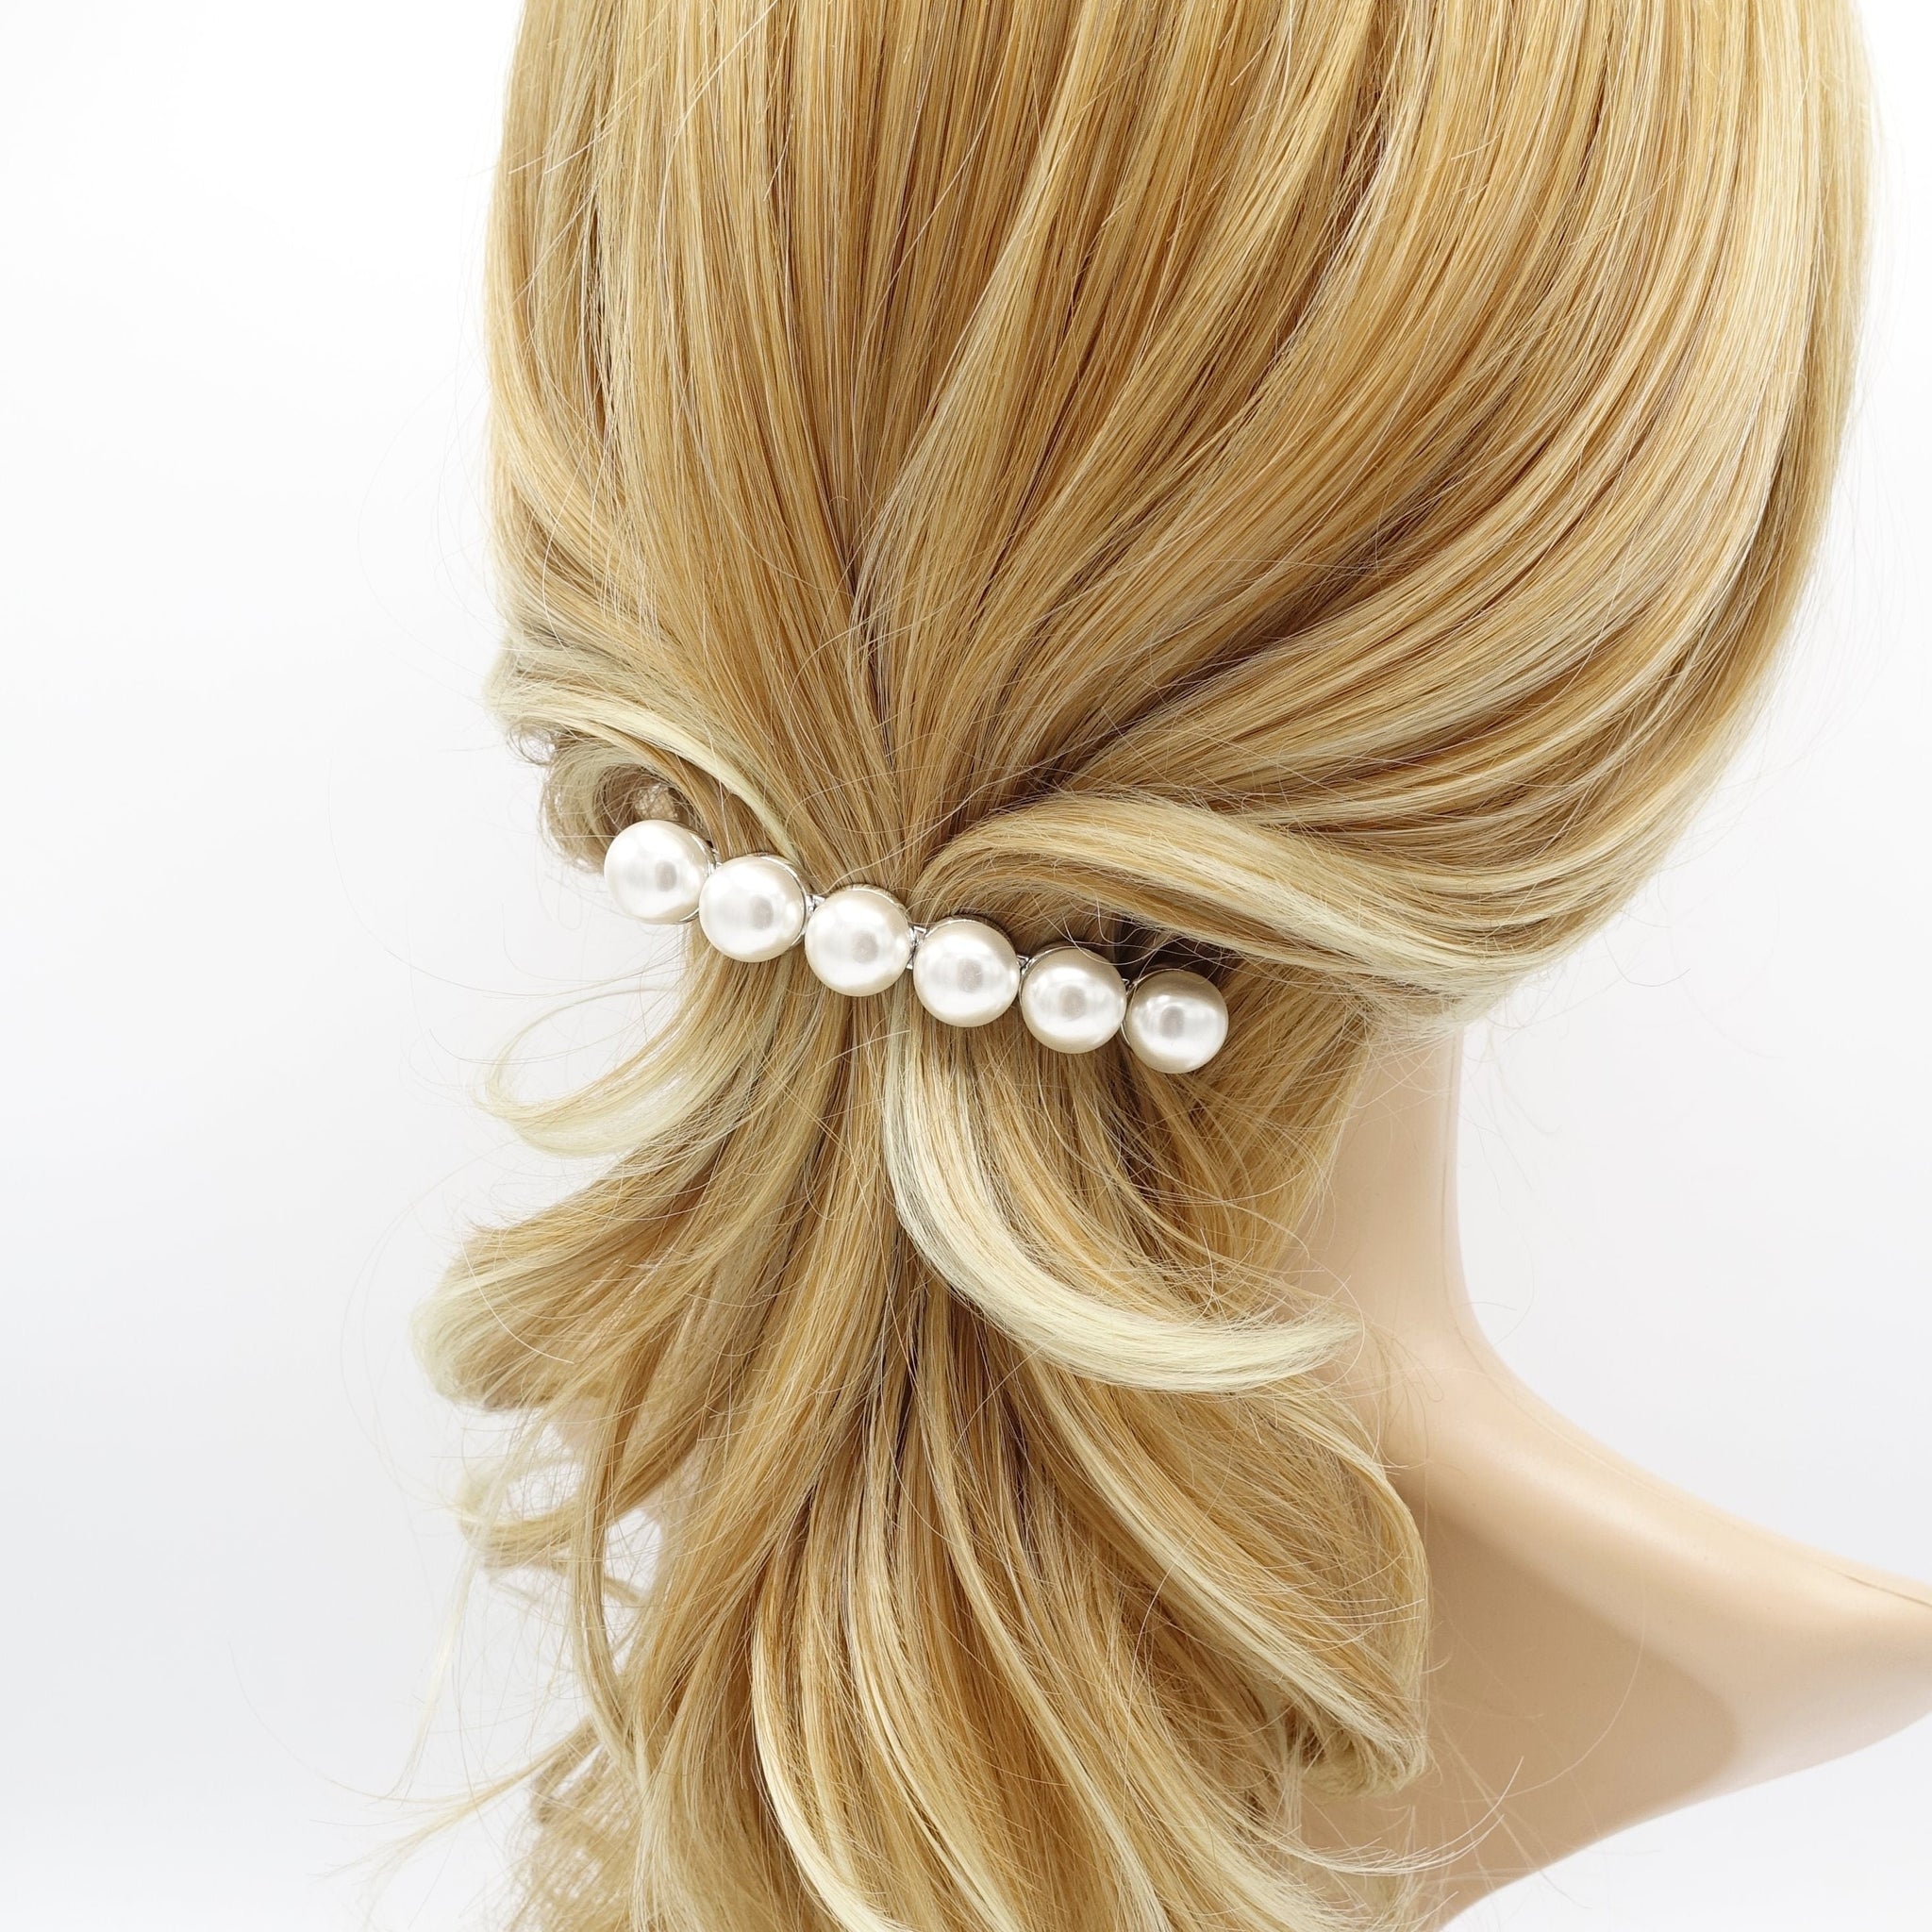 veryshine.com Barrette (Bow) donuts pearl embellished french barrette women hair accessory